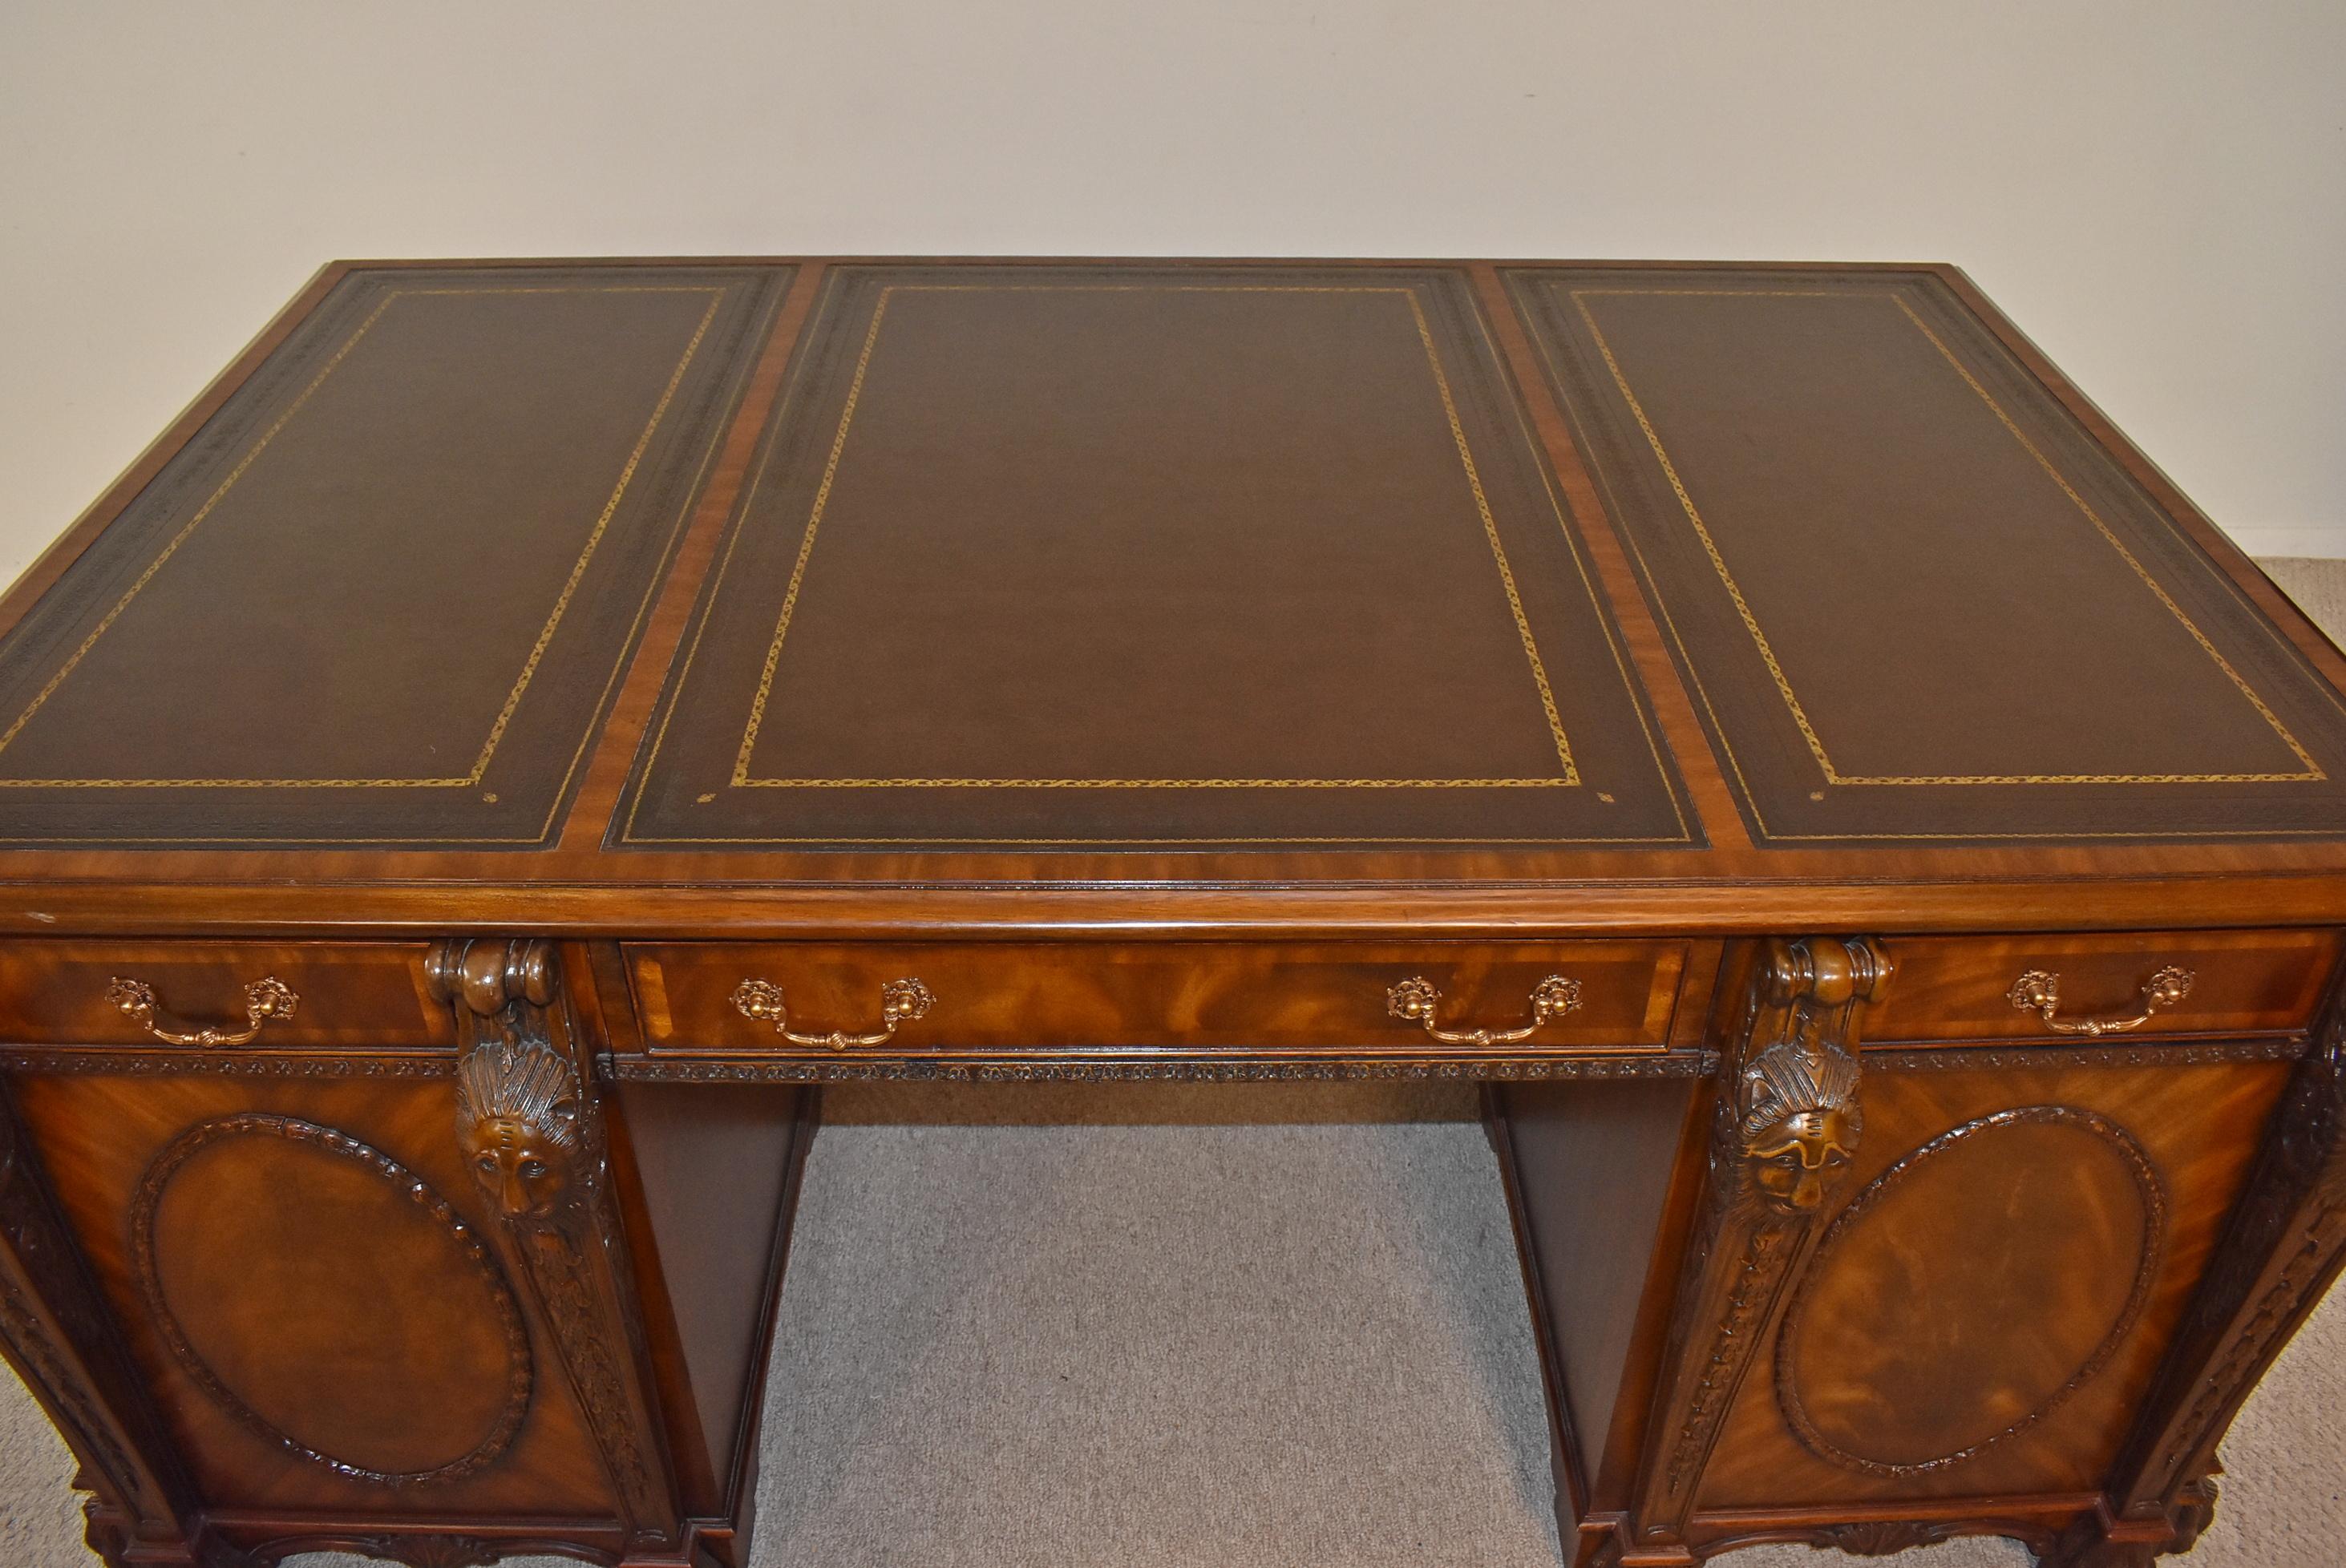 Chippendale Partners Desk by Maitland Smith. Circa 20th Century. Designed to evoke the refined decorative style of antique English furniture, the partners desk features large medallions, ornamental lion heads, and an ornate swag beneath the desk